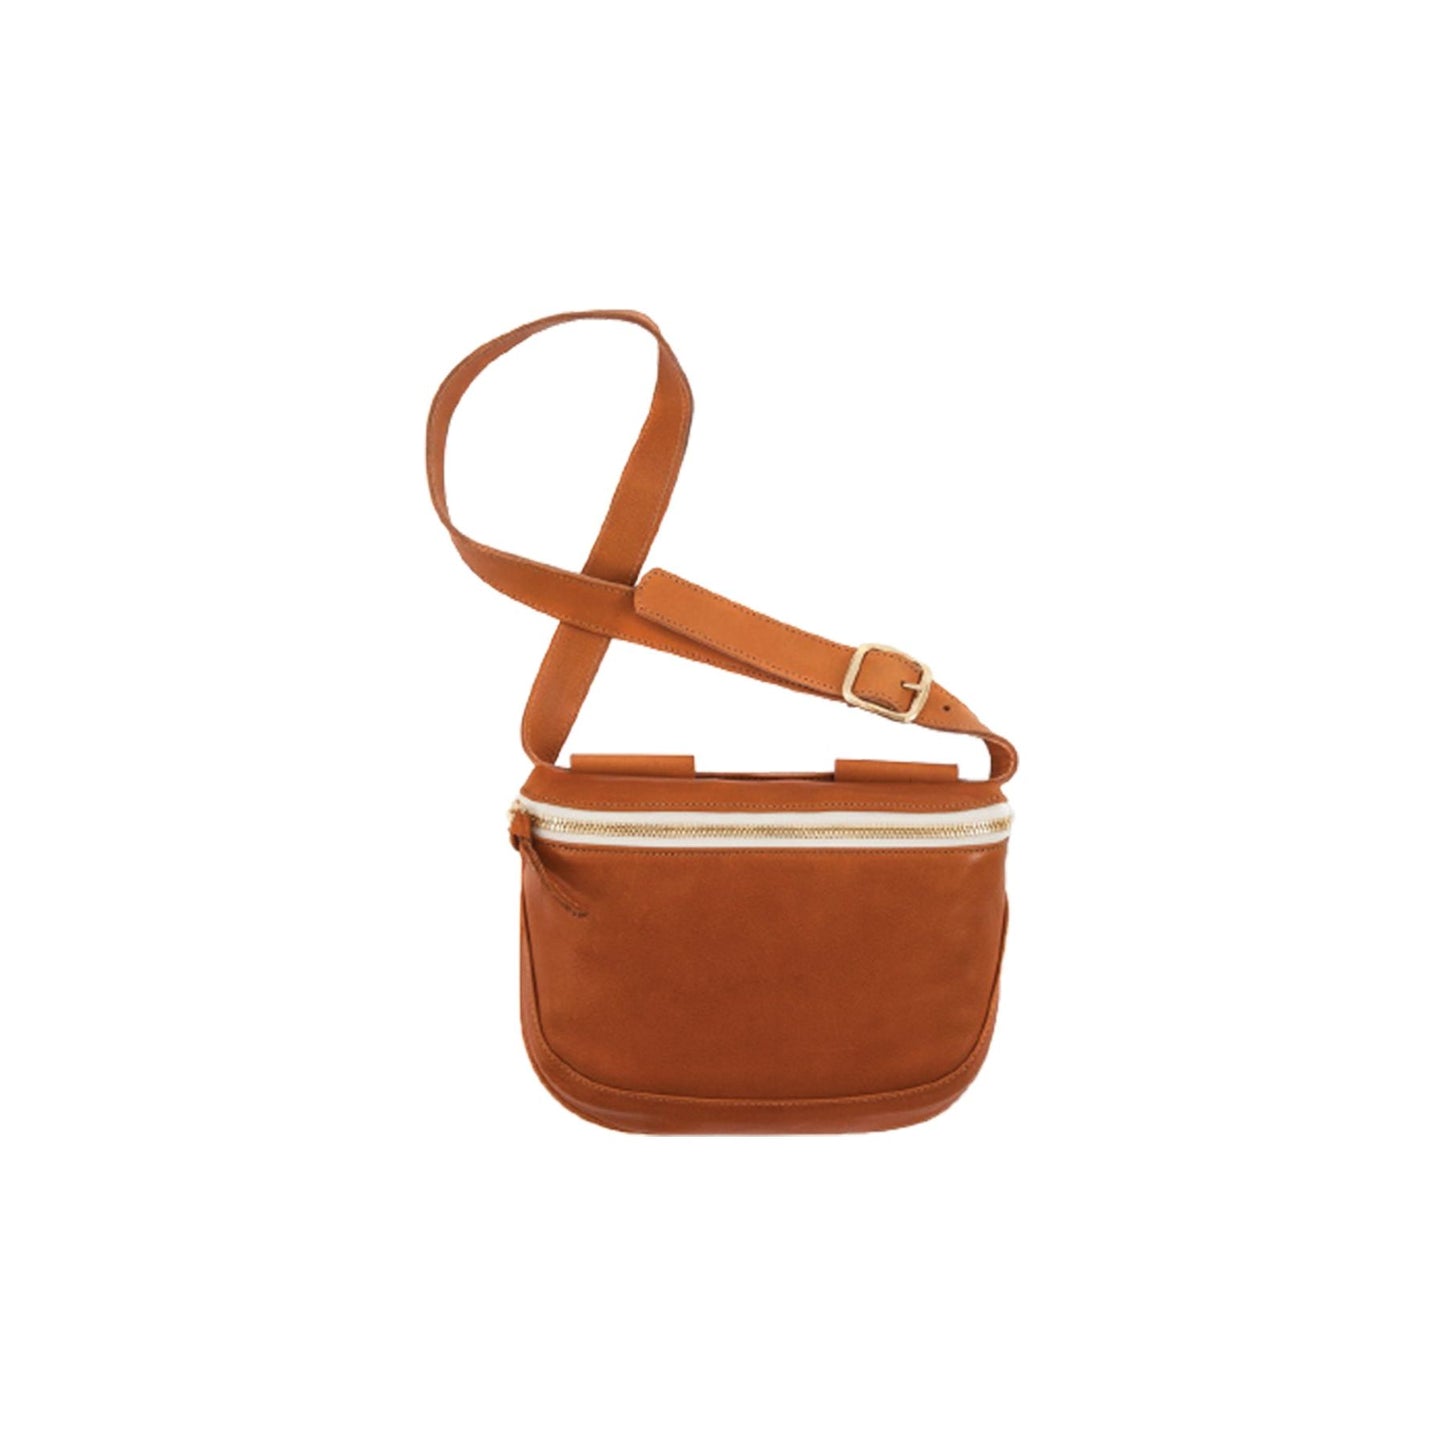 Clare V W Bags Neptune Fanny Pack, Tan